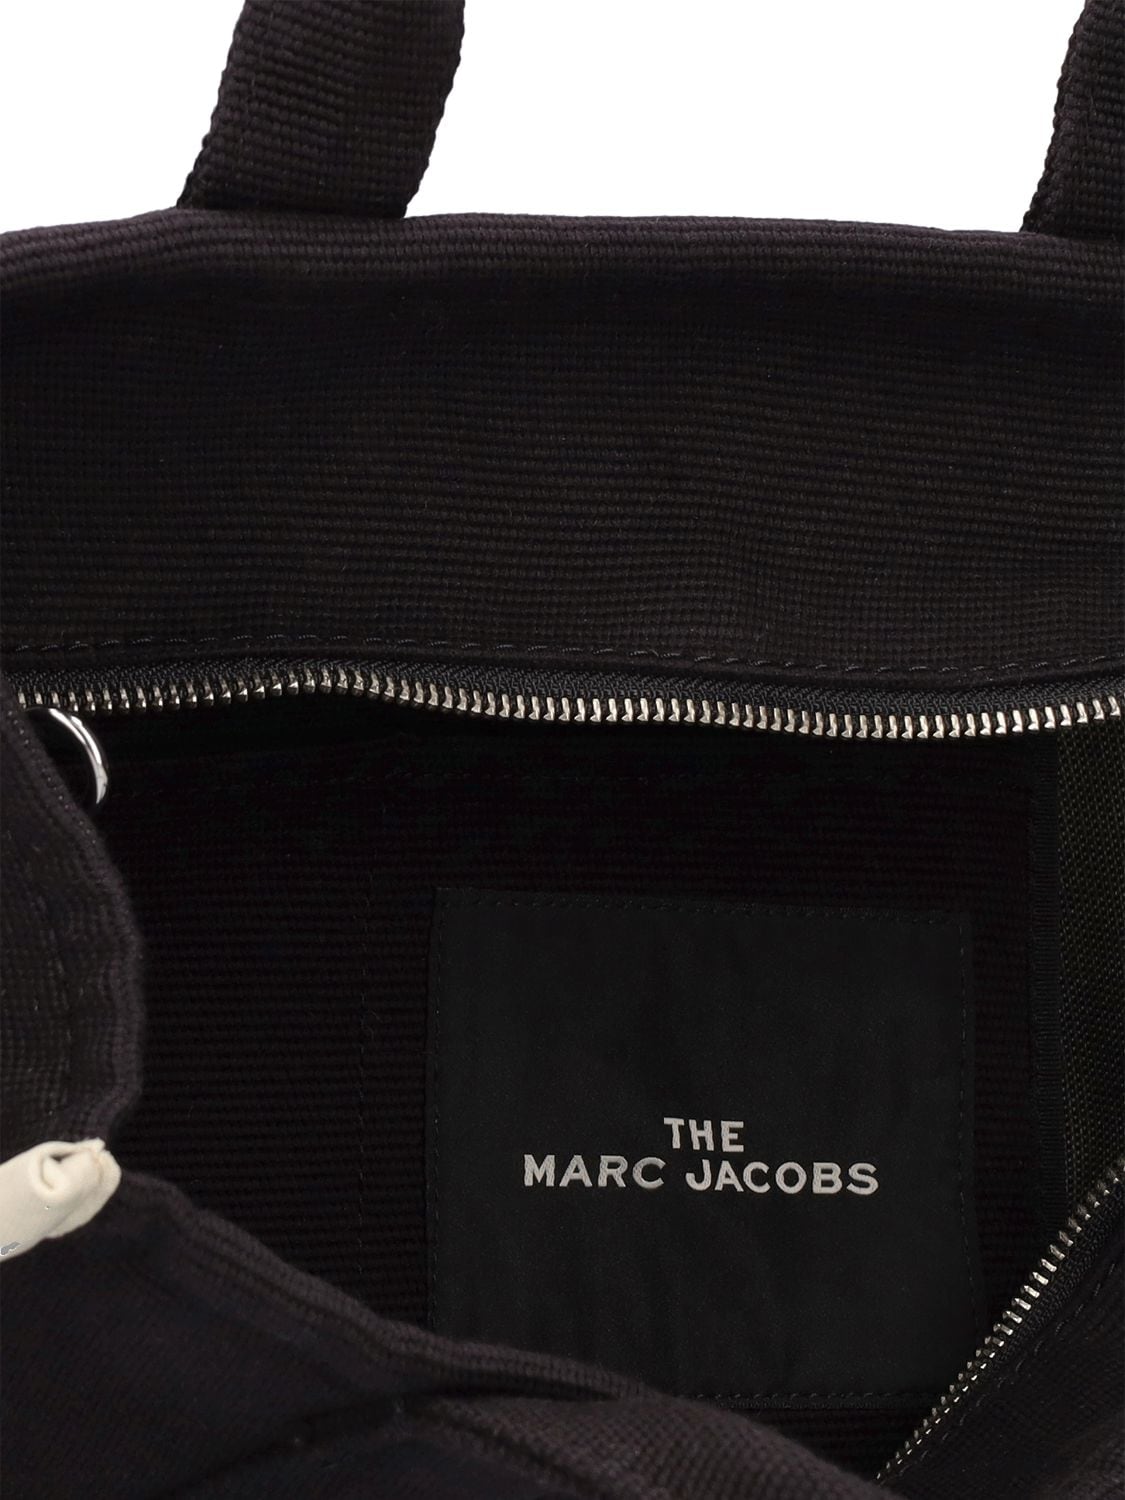 Shop Marc Jacobs (the) The Medium Tote Cotton Jacquard Bag In Black